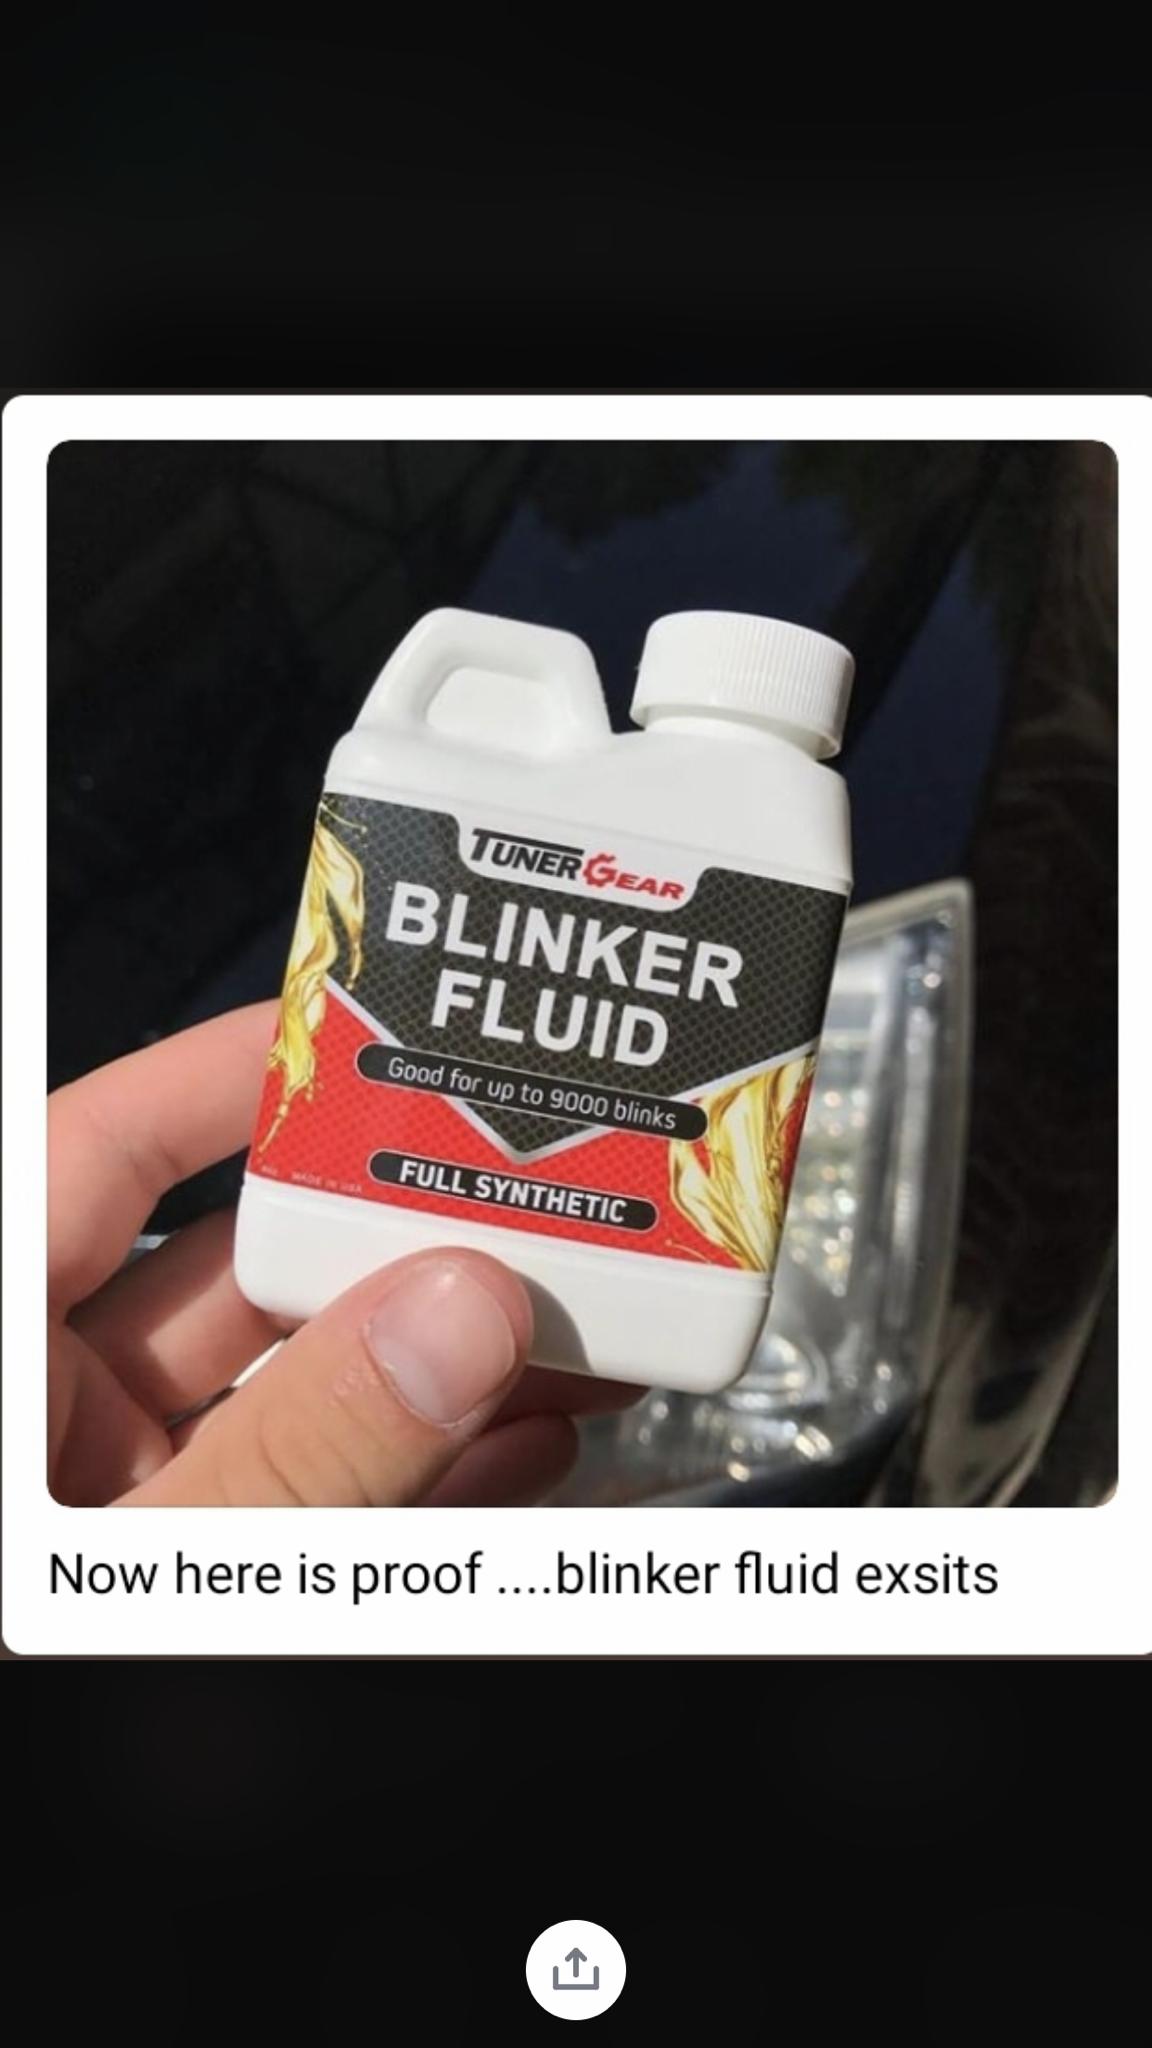 label - Tunergear Blinker Fluid Good for up to 9000 blinks Full Synthetic Now here is proof ....blinker fluid exsits